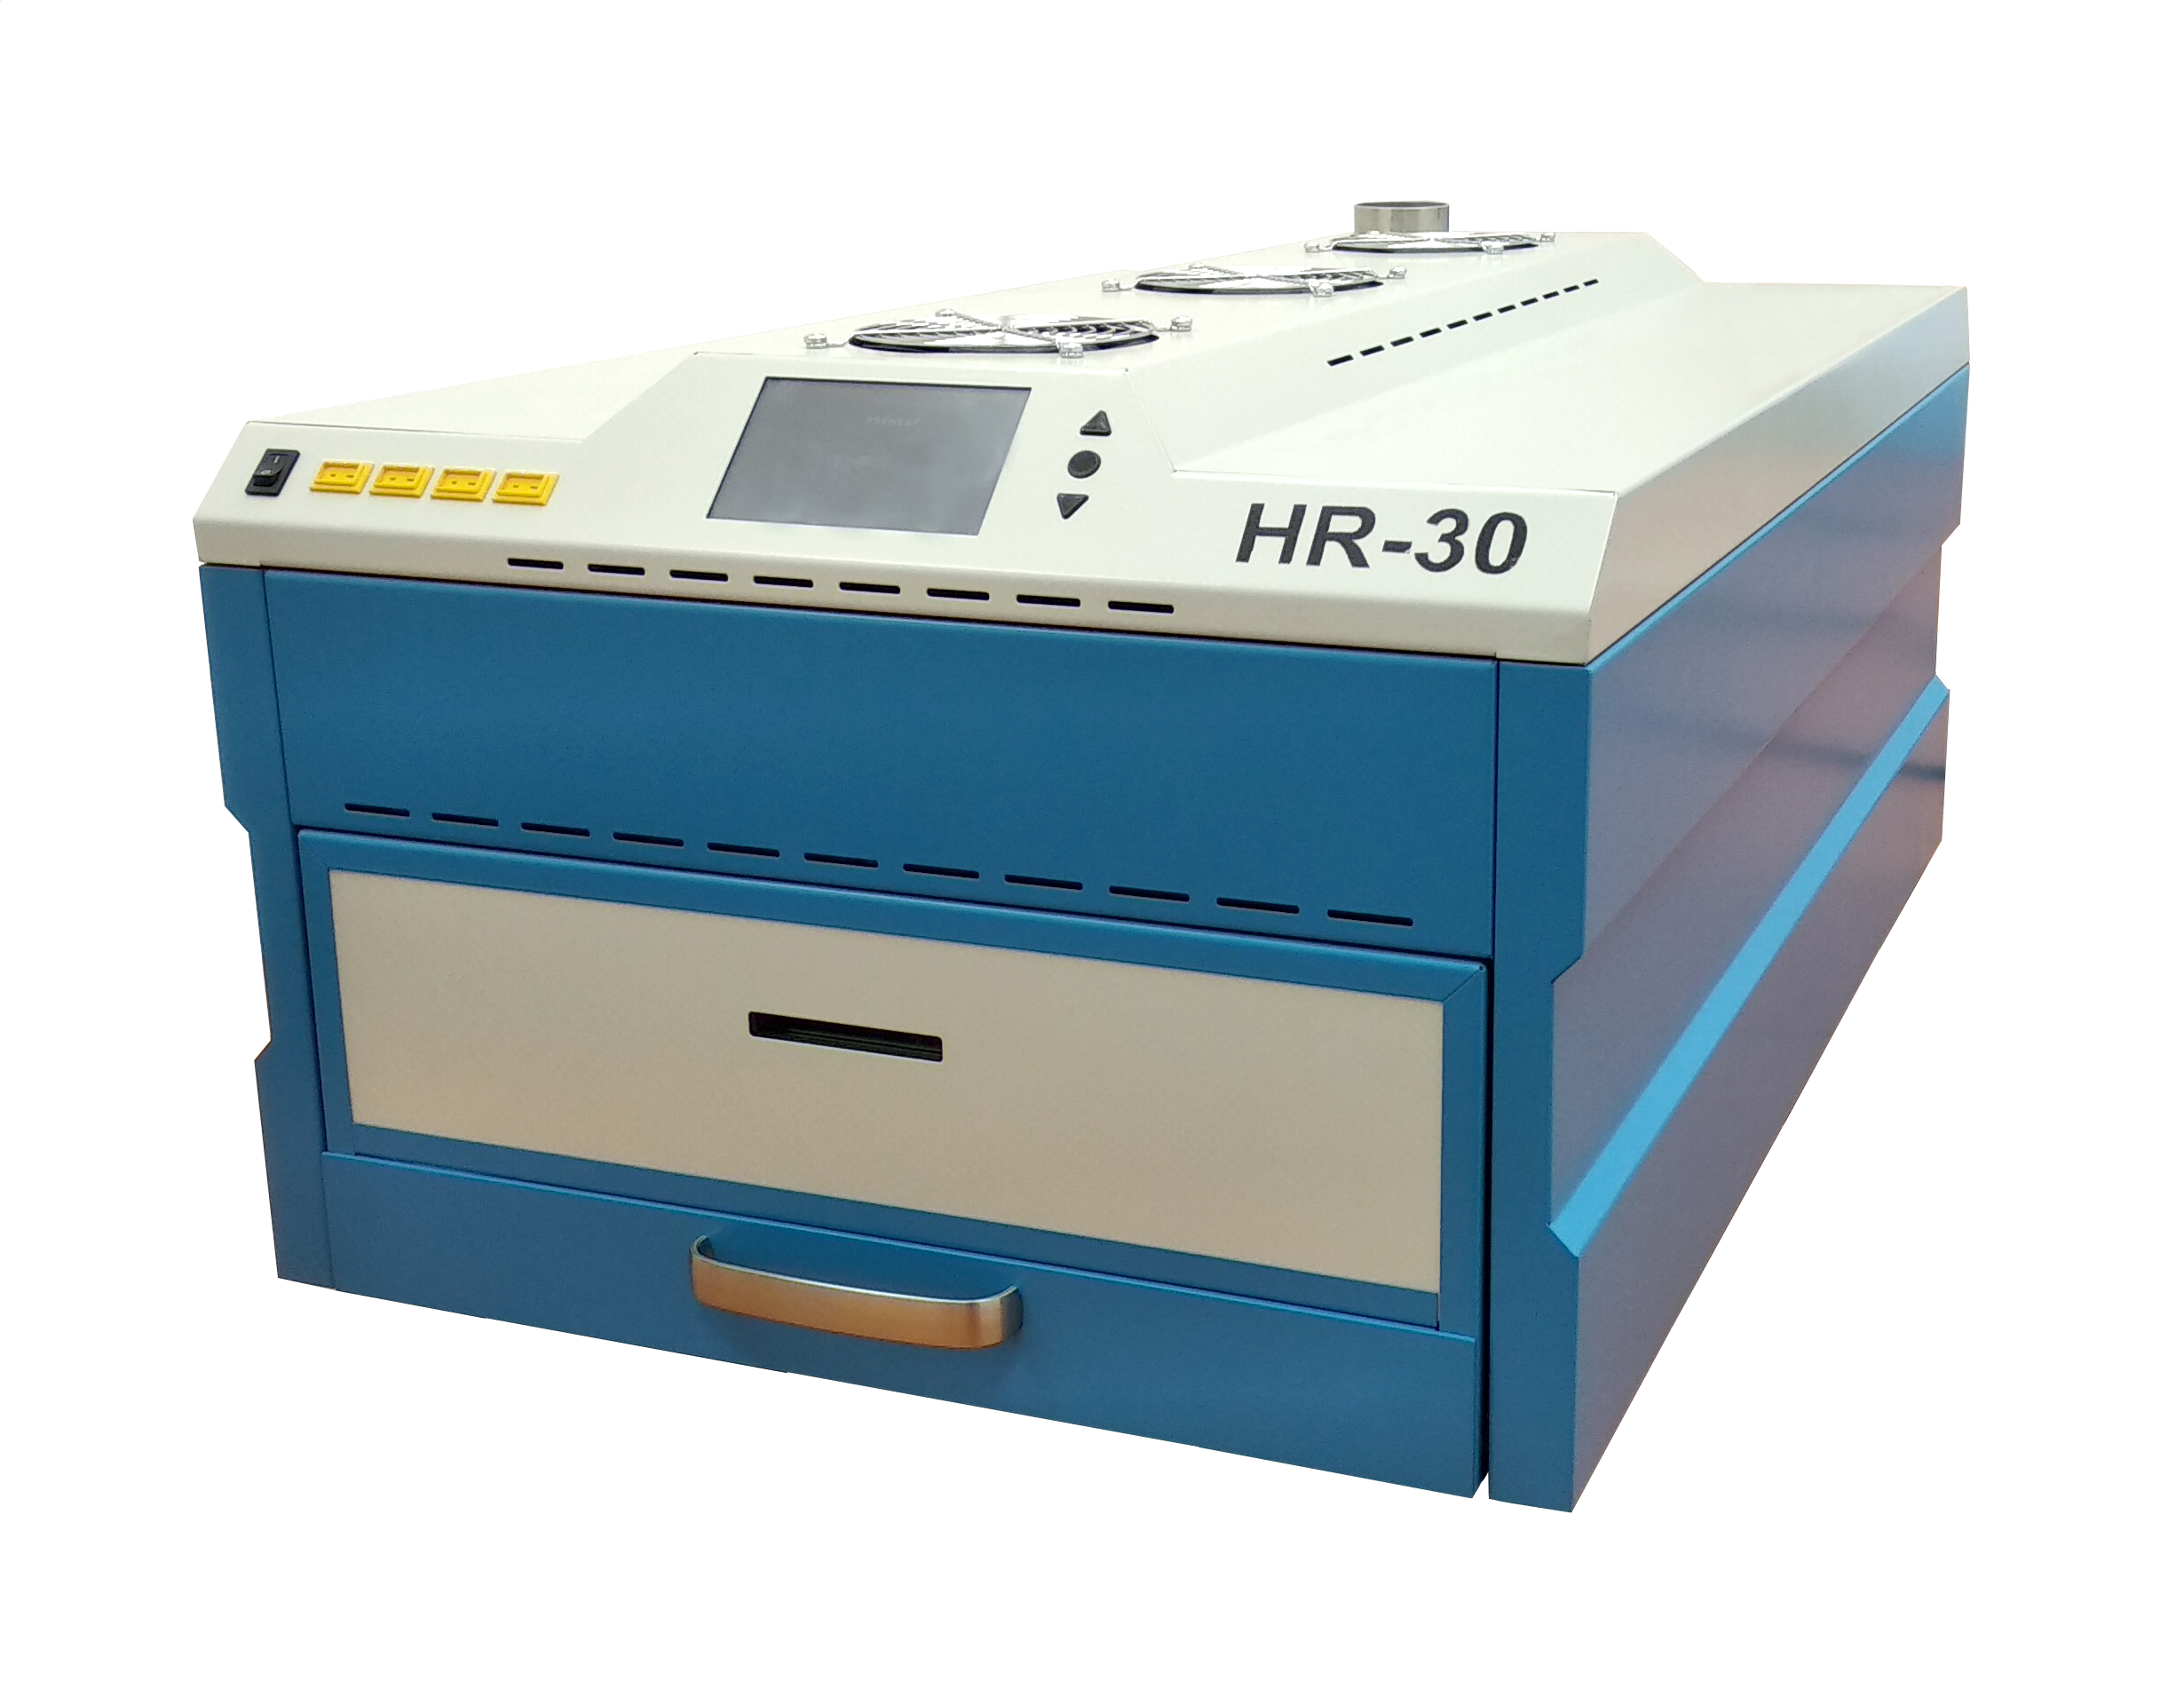 Large reflow oven HR-30 with possibility of N2